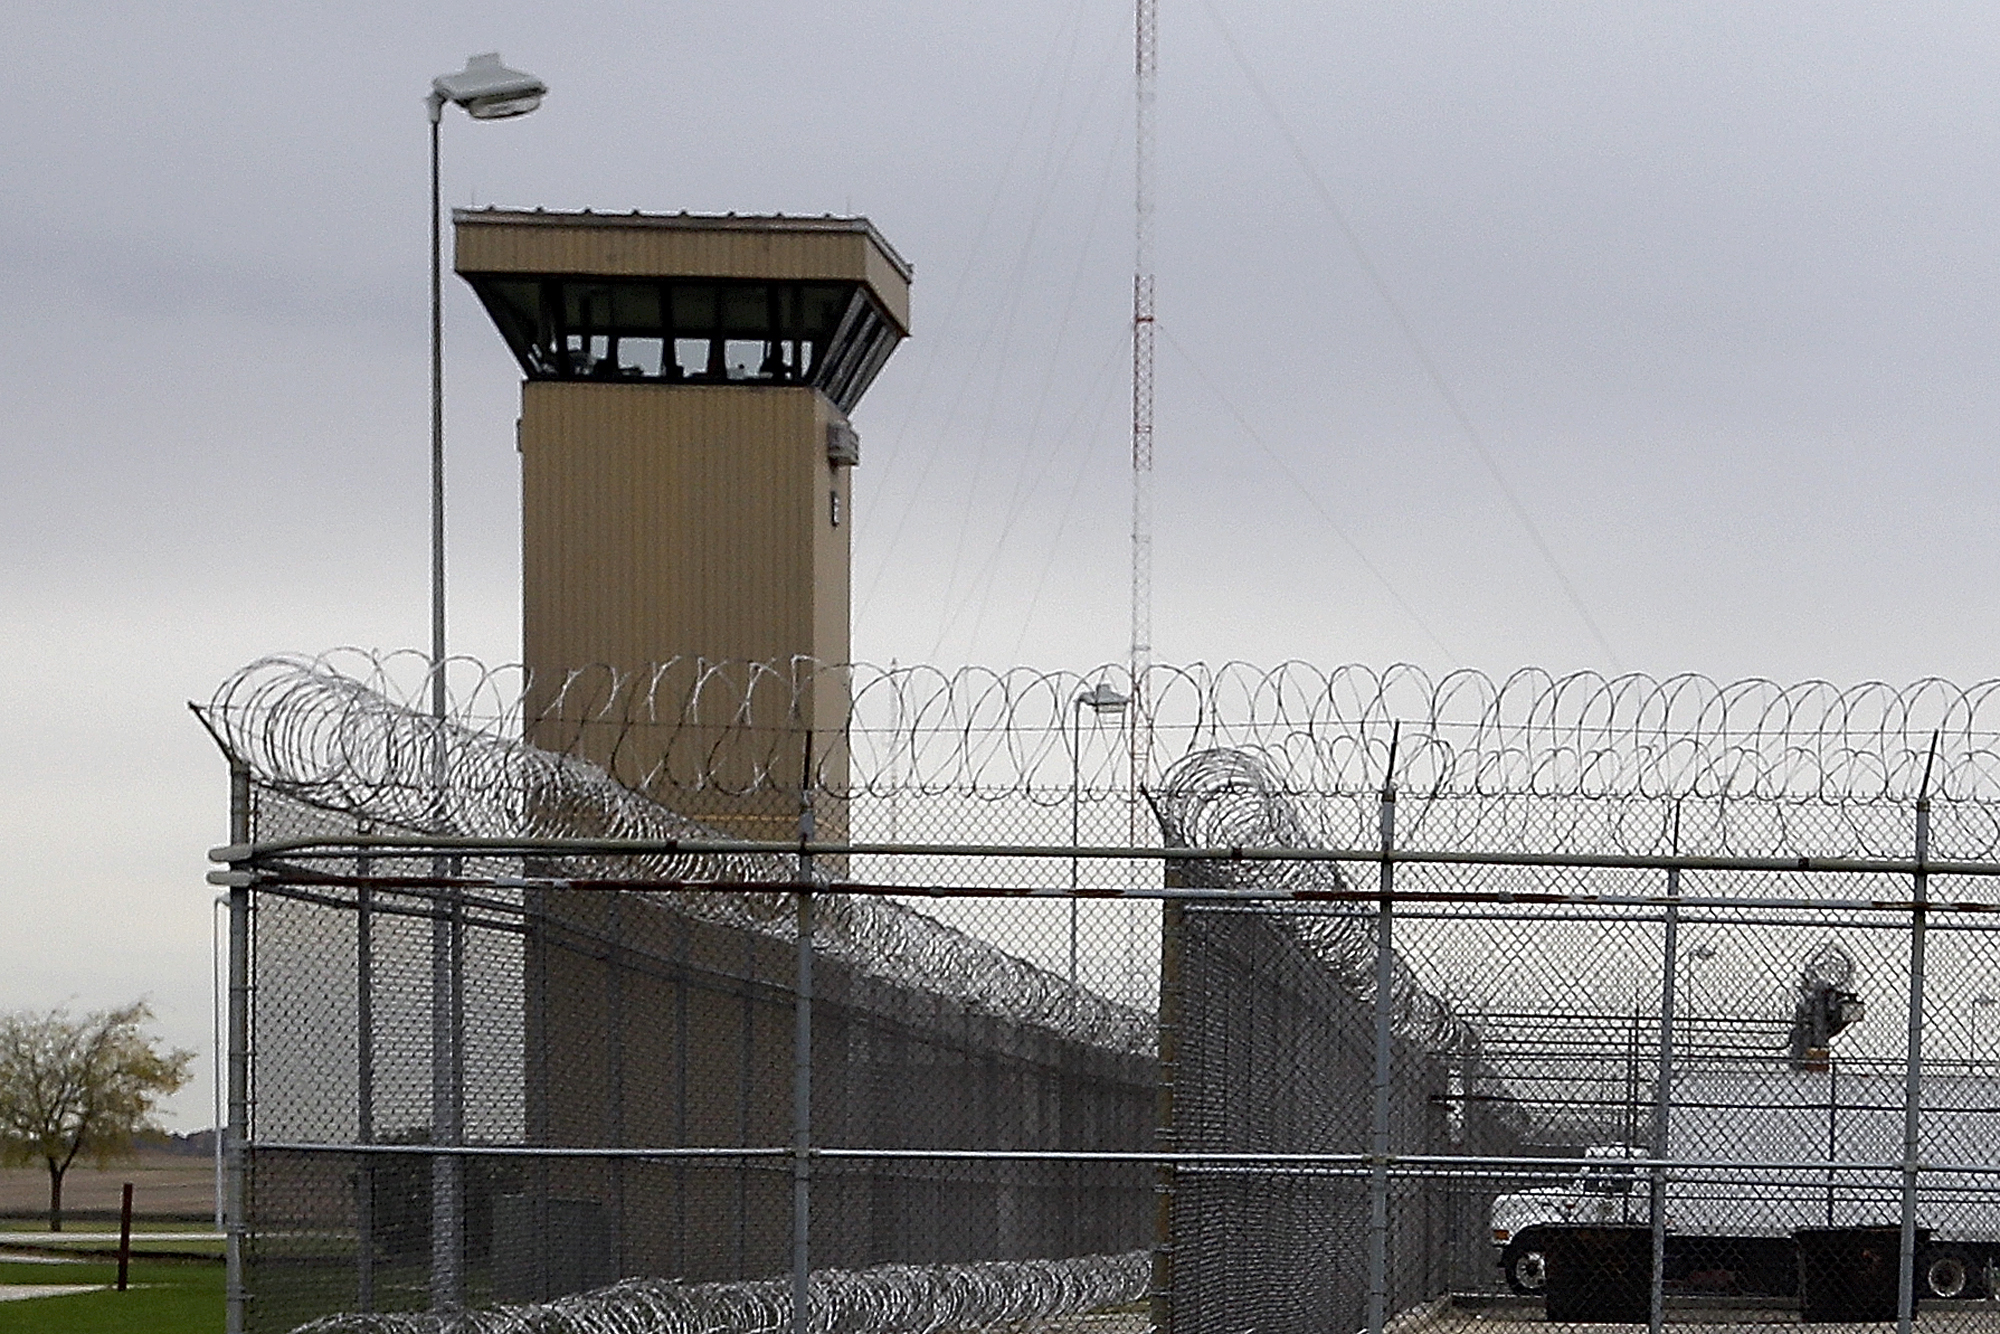 Corrections Officials Confirm More Than 200 Inmates Test Positive For COVID-19 At Waupun Prison